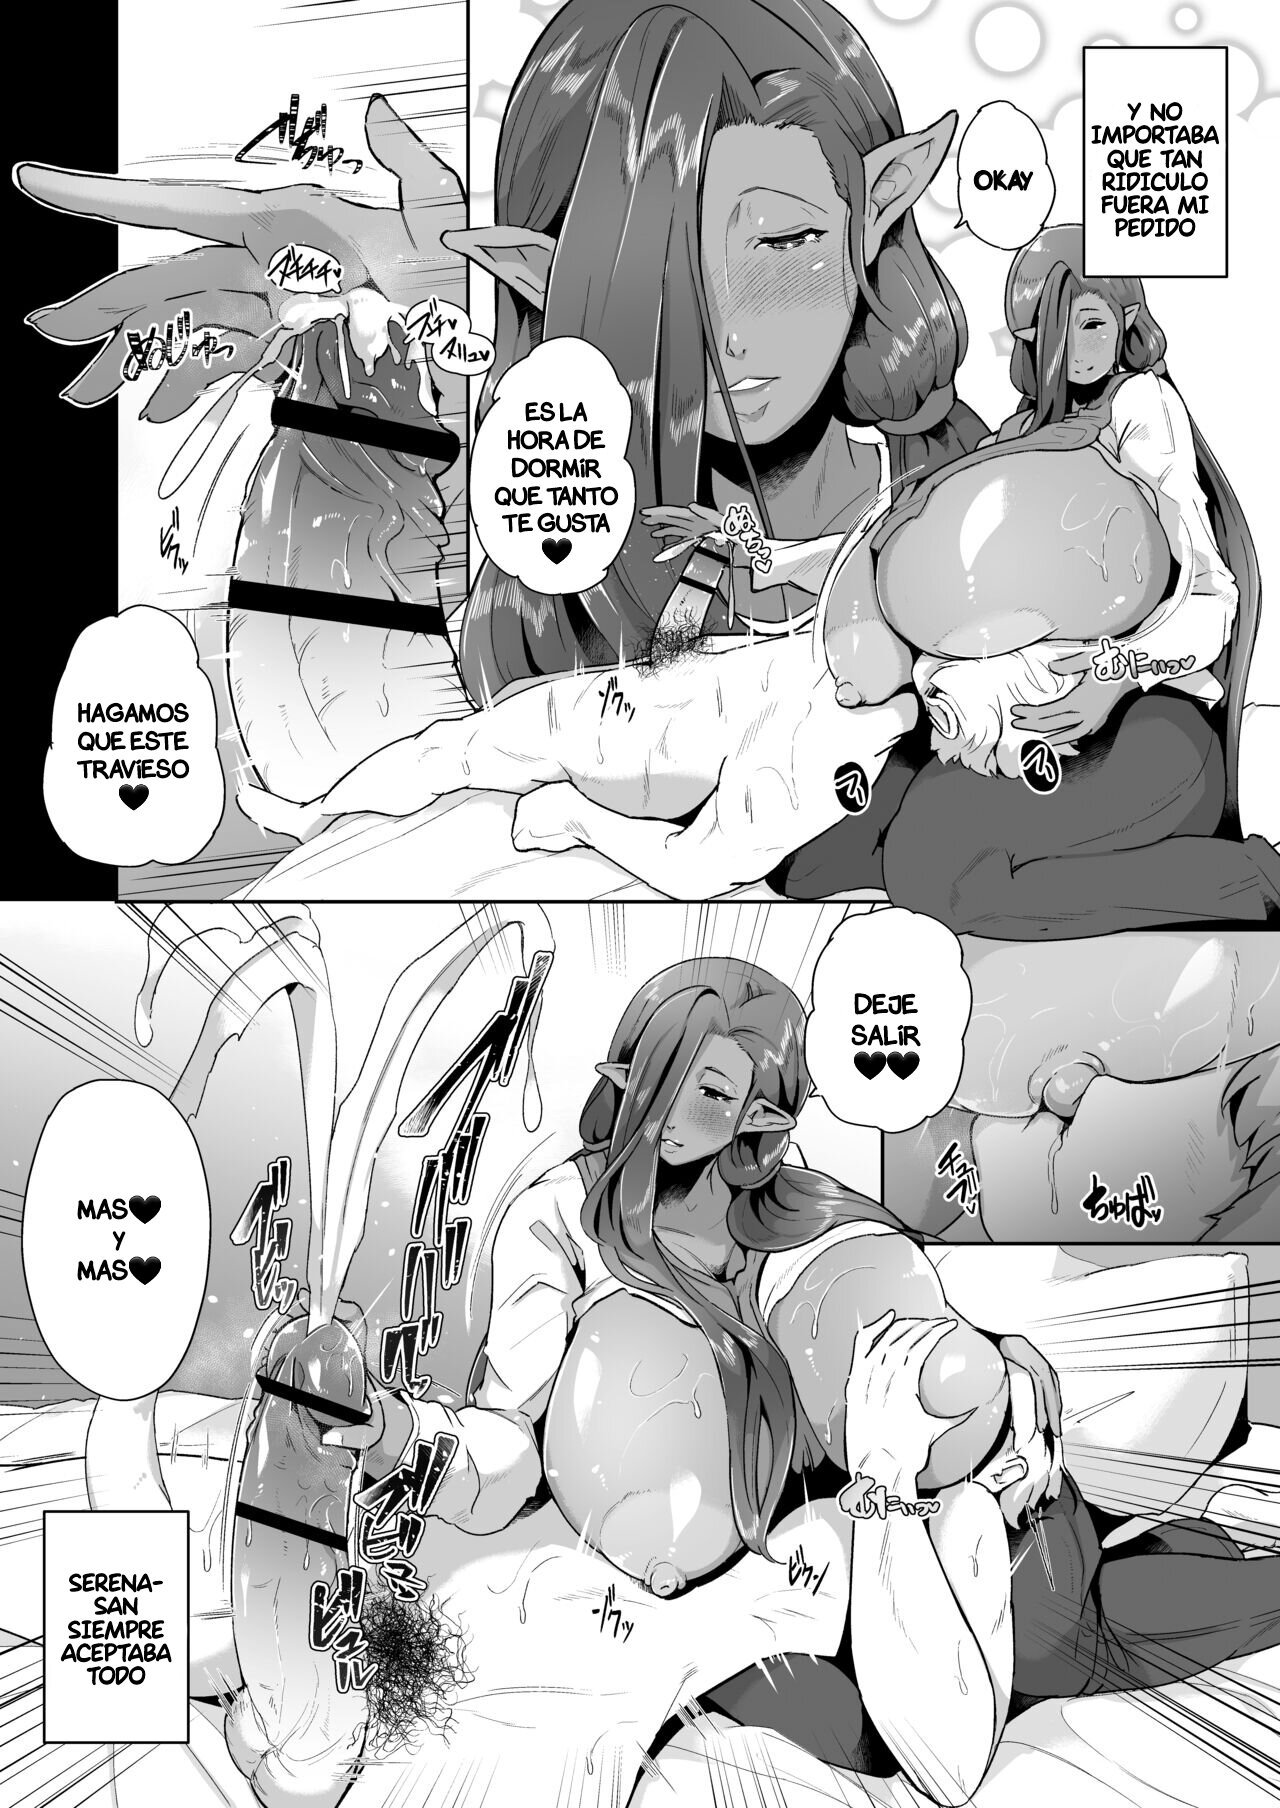 Making out and Being Lovey-Dovey With a Huge Boobs Chuby Dark Elf, Whosale Sexual Activity - 29